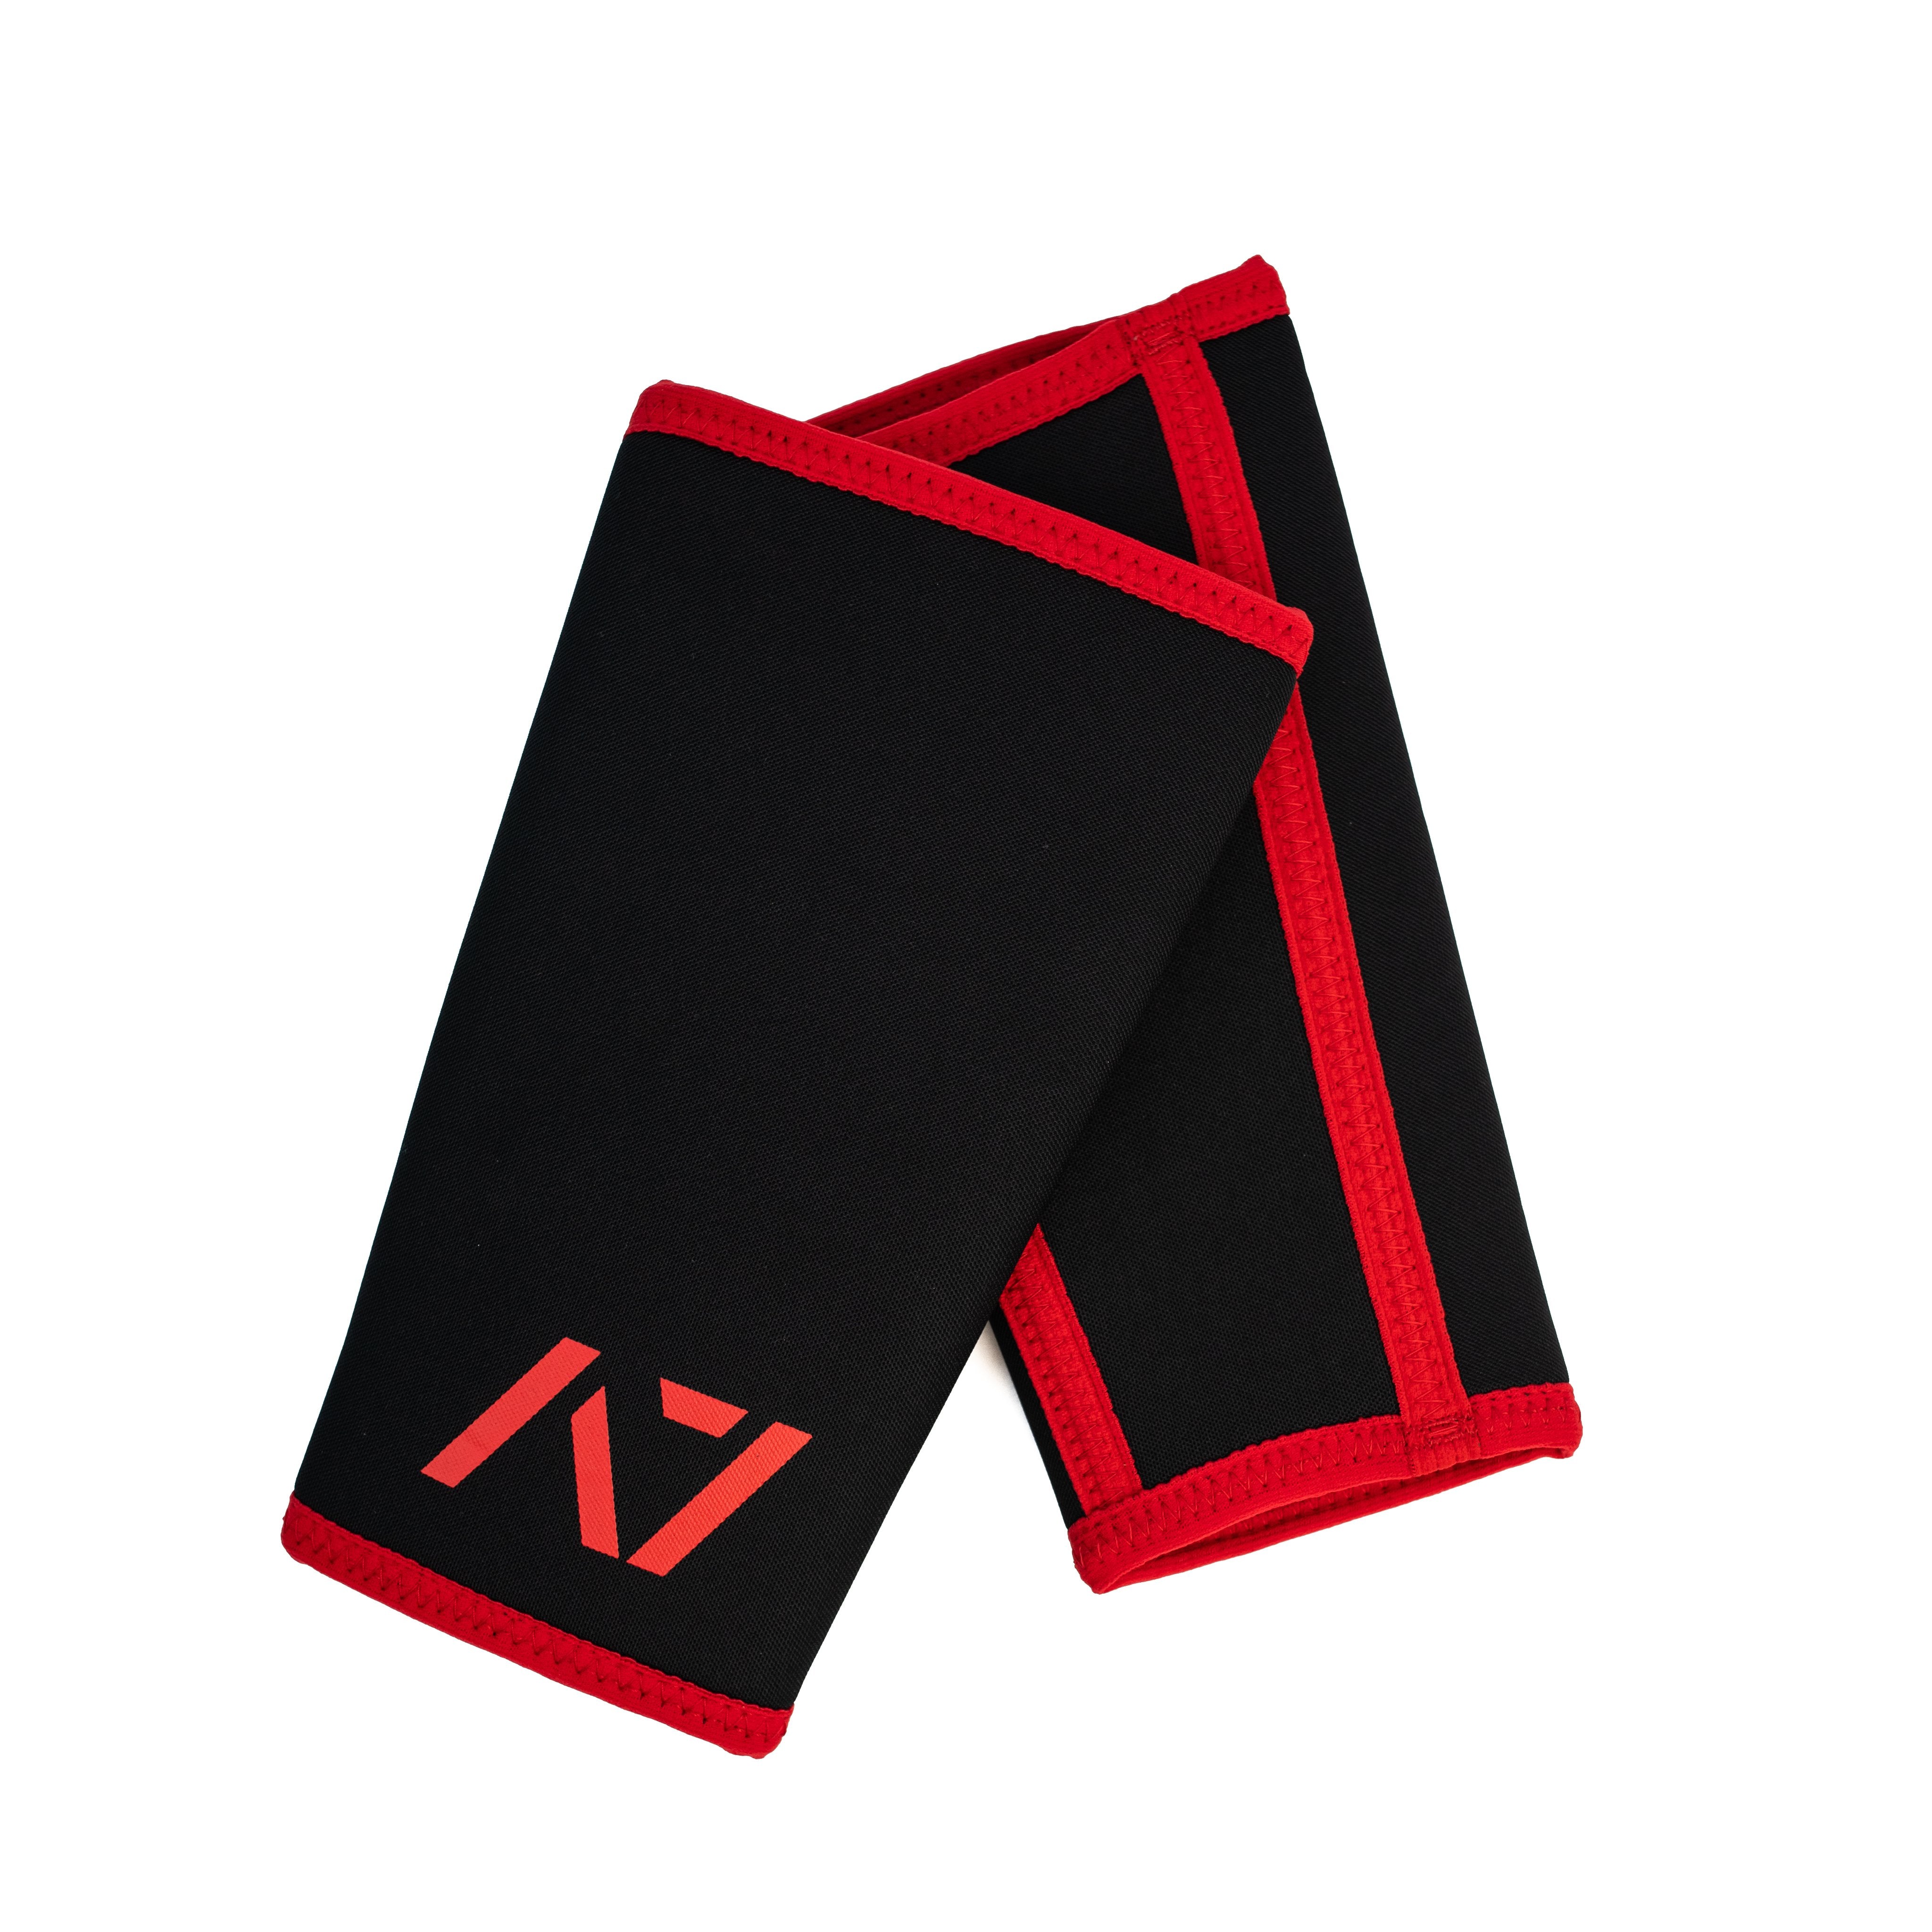 A7 Inferno Stiff knee sleeves feature black and red design. These are structured with a downward cut panel on the back of the quad and calf to ensure these have the ultimate compression at the knee joint. The A7 CONE Inferno Stiff Knee Sleeves are IPF approved and are allowed in all IPF competitions and affiliate federations like the European Powerlifting Federation and all federations across Europe. A7 UK shipping to UK and Europe. 